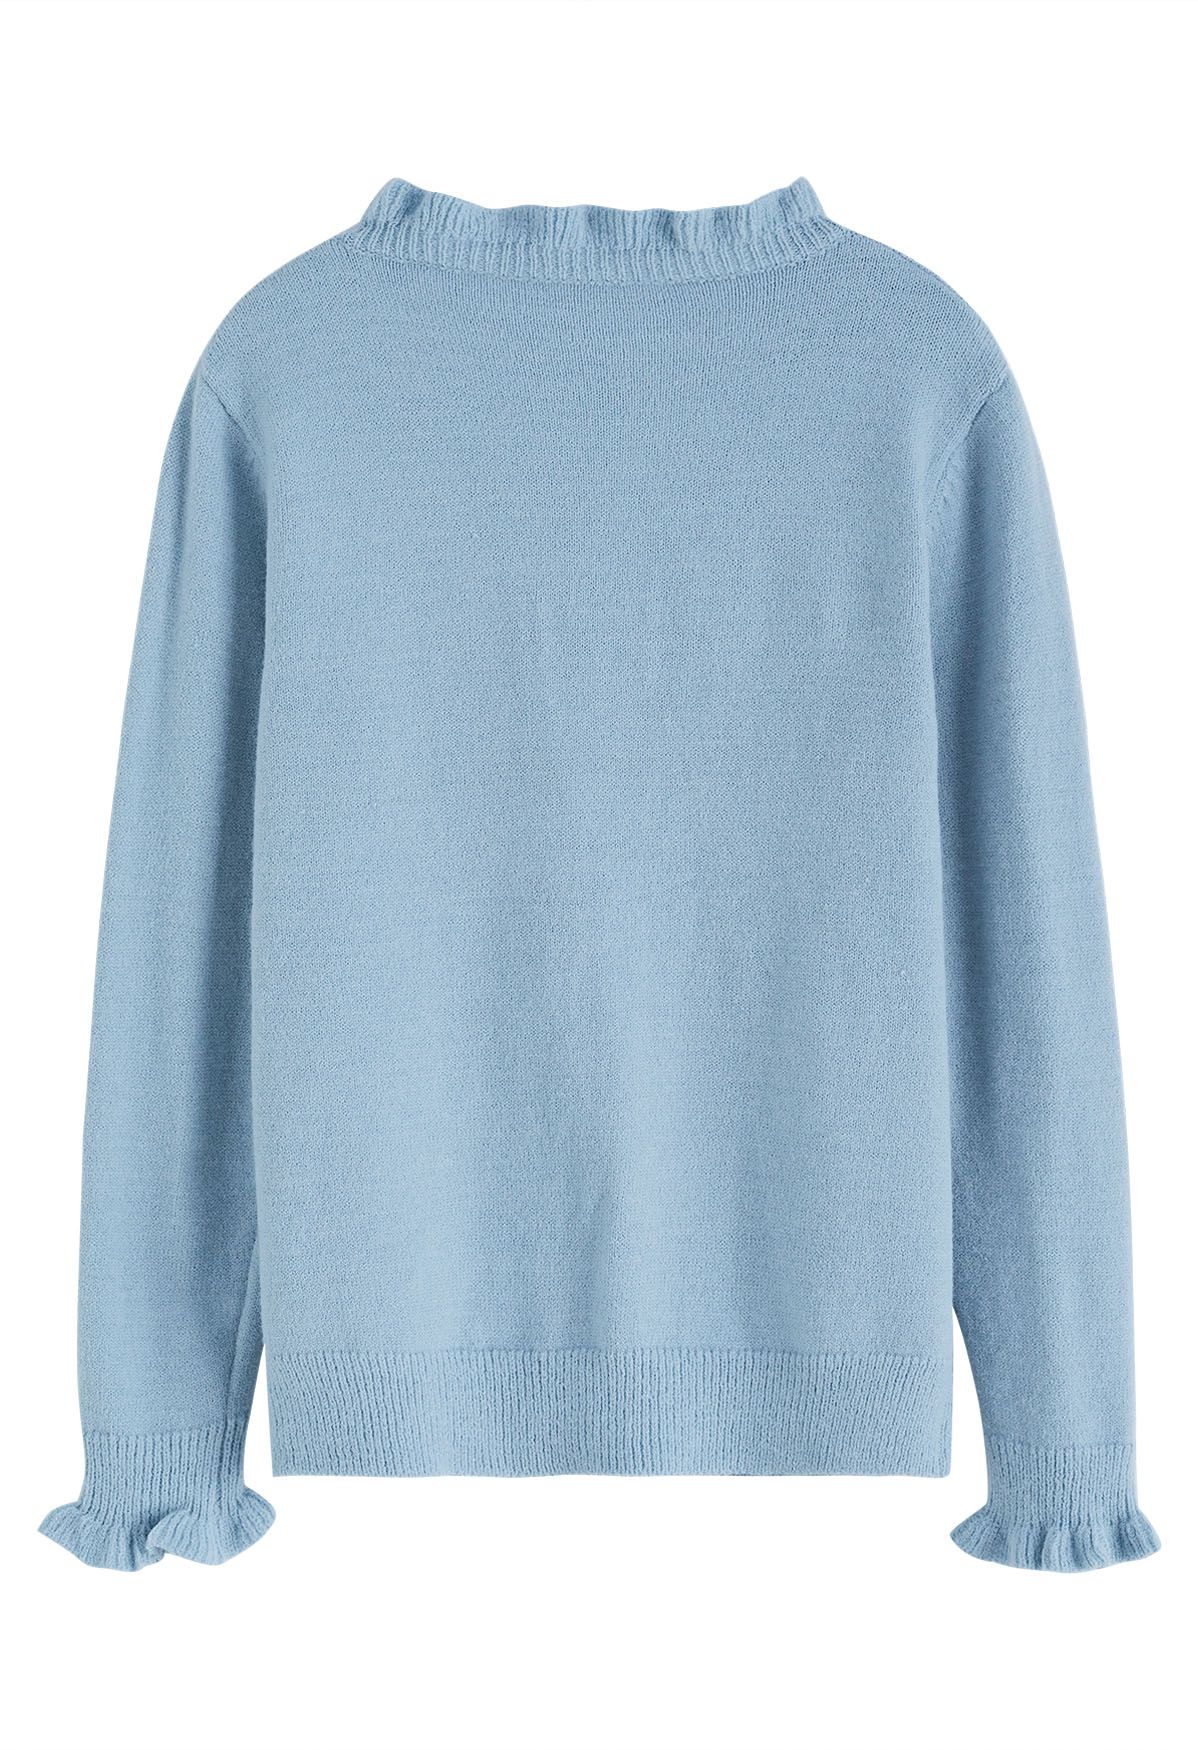 Ruffle Edge Button Front Knit Sweater in Blue